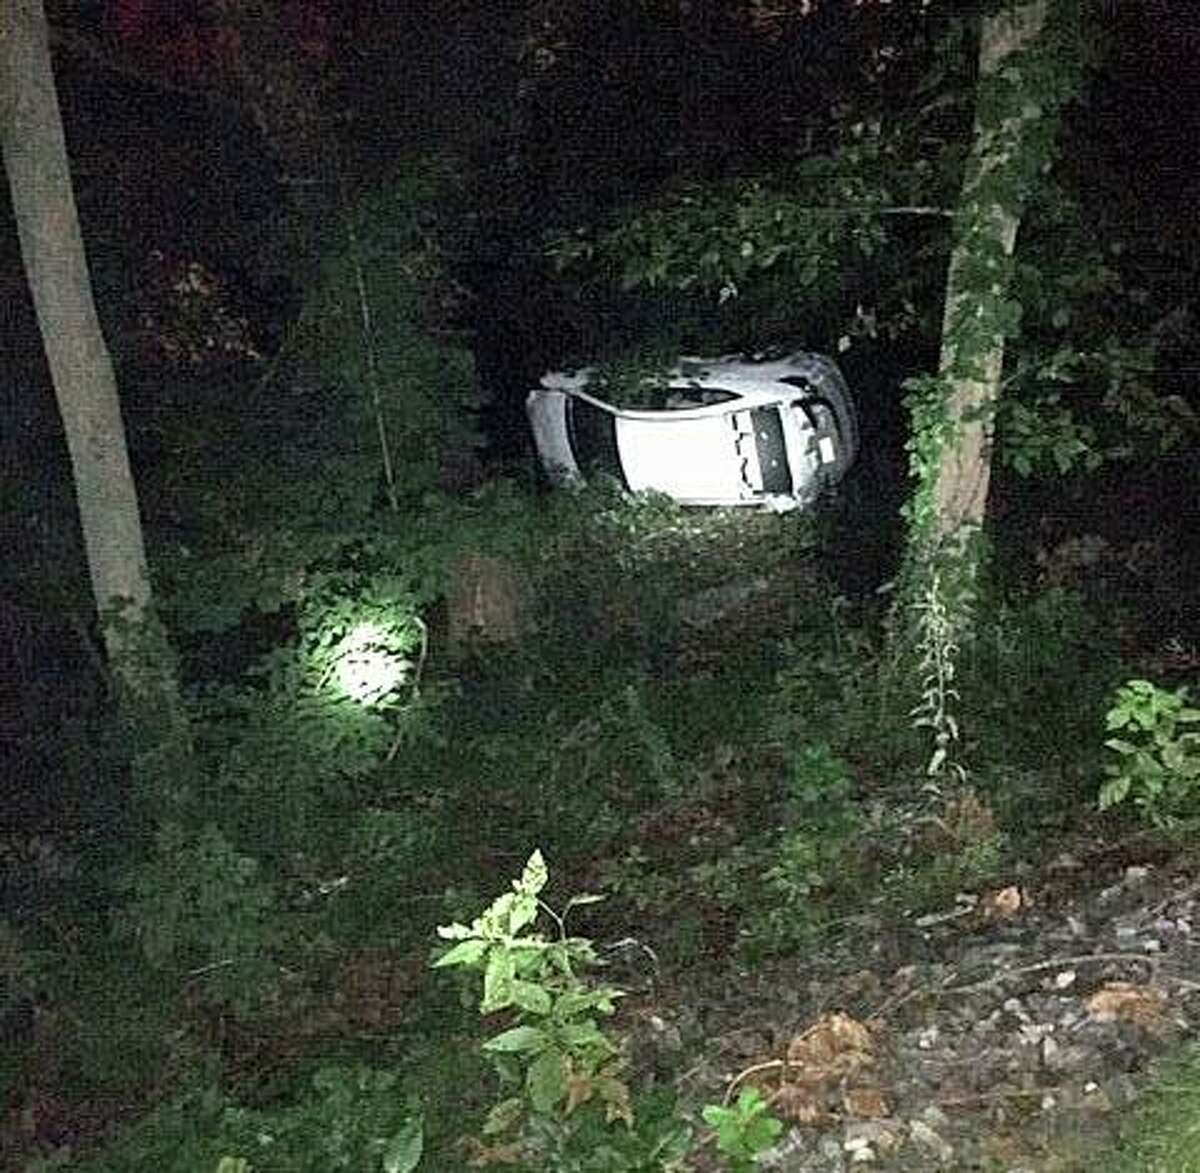 A car that veered off a Merritt Parkway exit ended up in the Norwalk River early Saturday morning, according to Deputy Fire Chief Edward Prescott. Prescott, who estimated the fall to be about 60 feet, said the driver of the car was not seriously injured. The driver, who was not identified, was transported to Norwalk Hospital to be examined for any injuries.